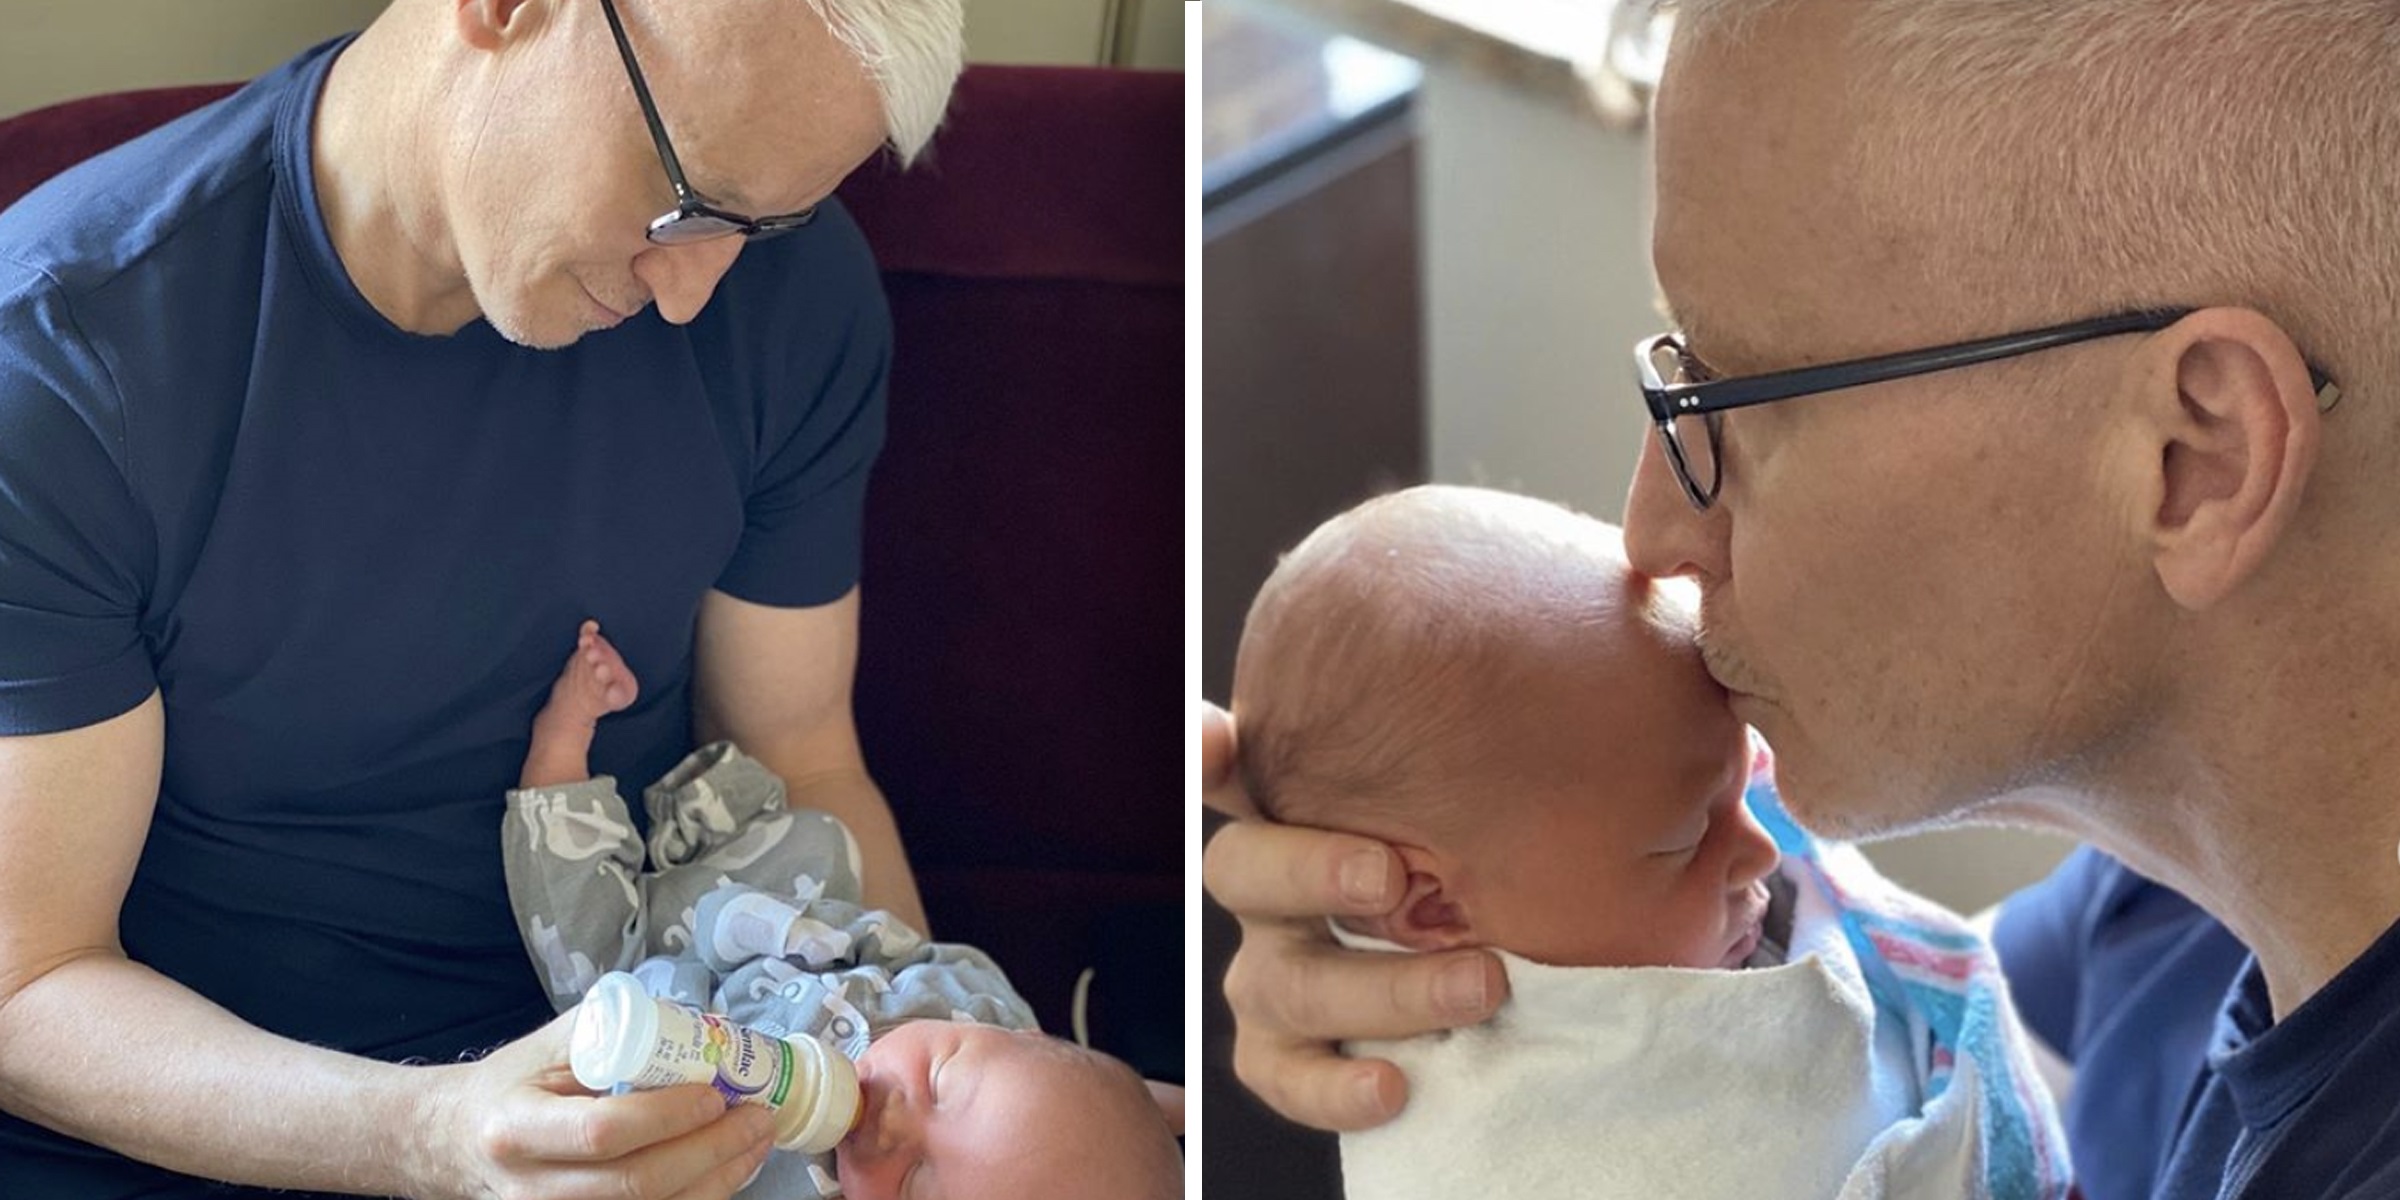 Anderson Cooper Is Now a Dad! Welcomes Baby Boy Via Surrogate